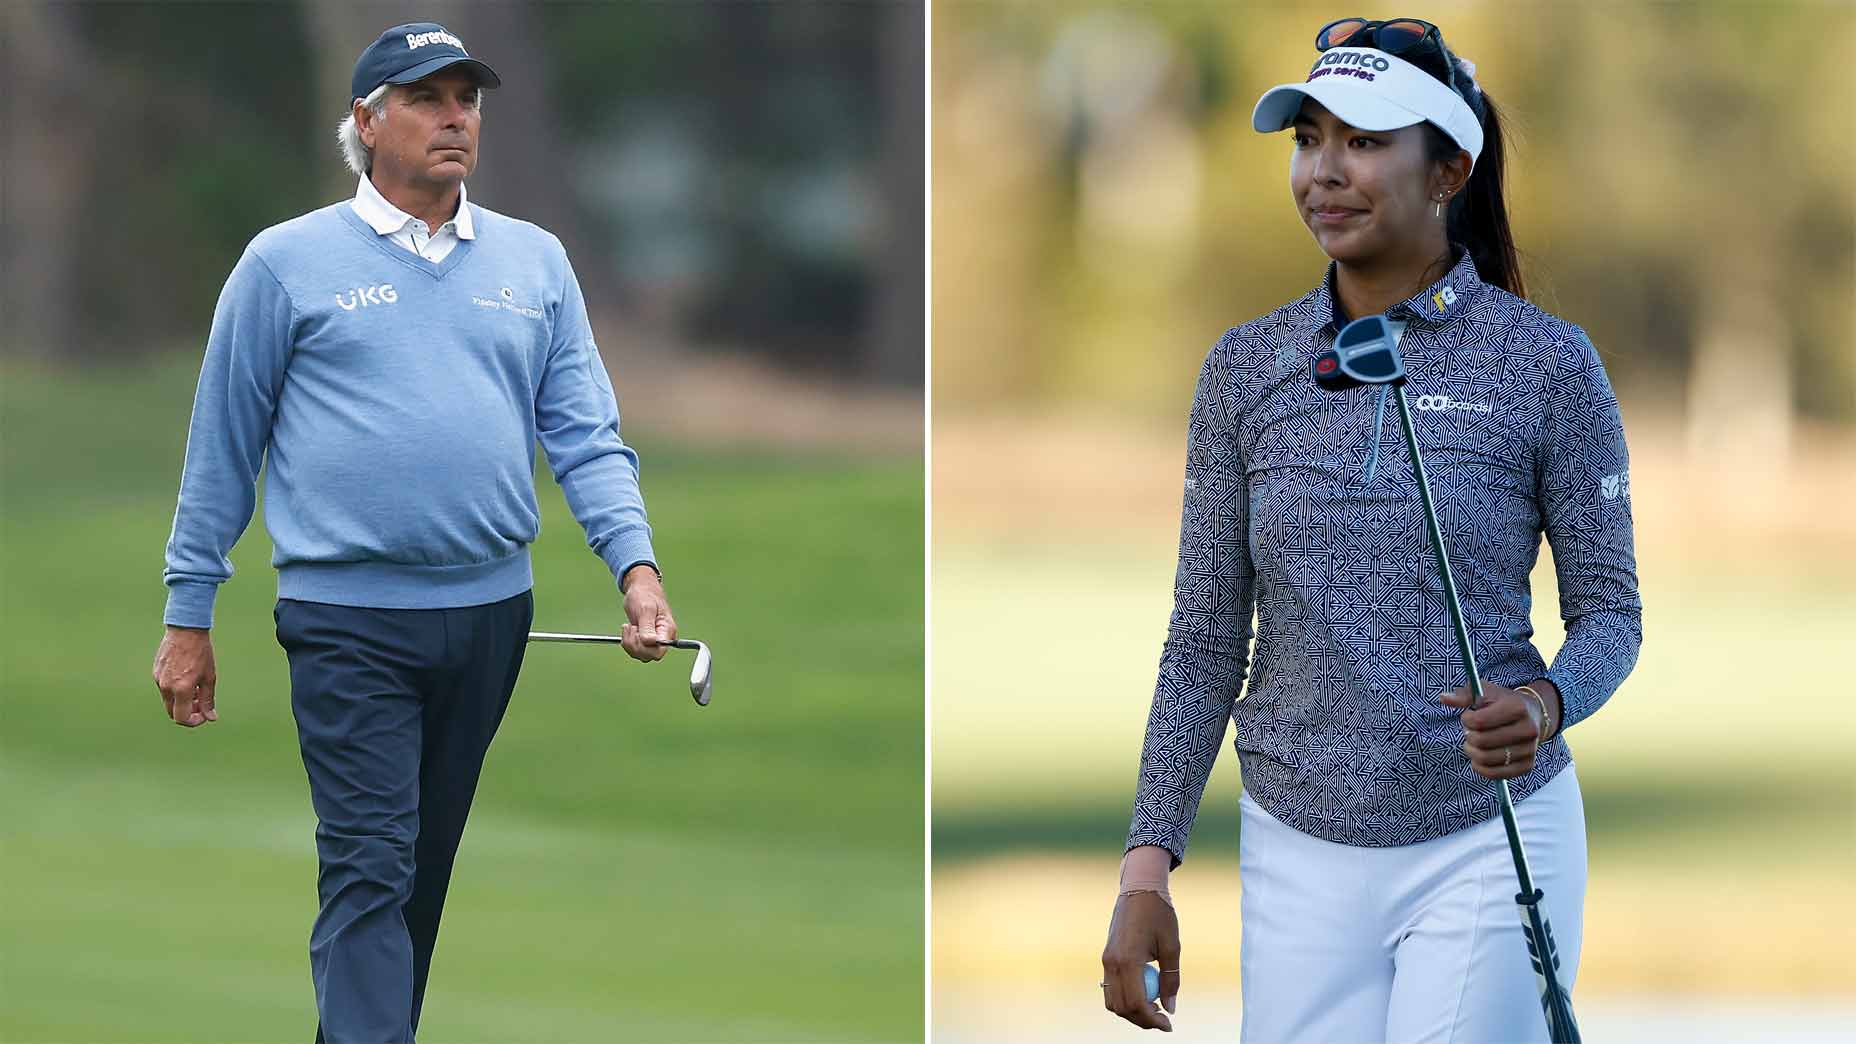 fred couples walks with a putter in his hand wearing a blue sweater. alison lee stands wearing a visor wearing a grey pullover